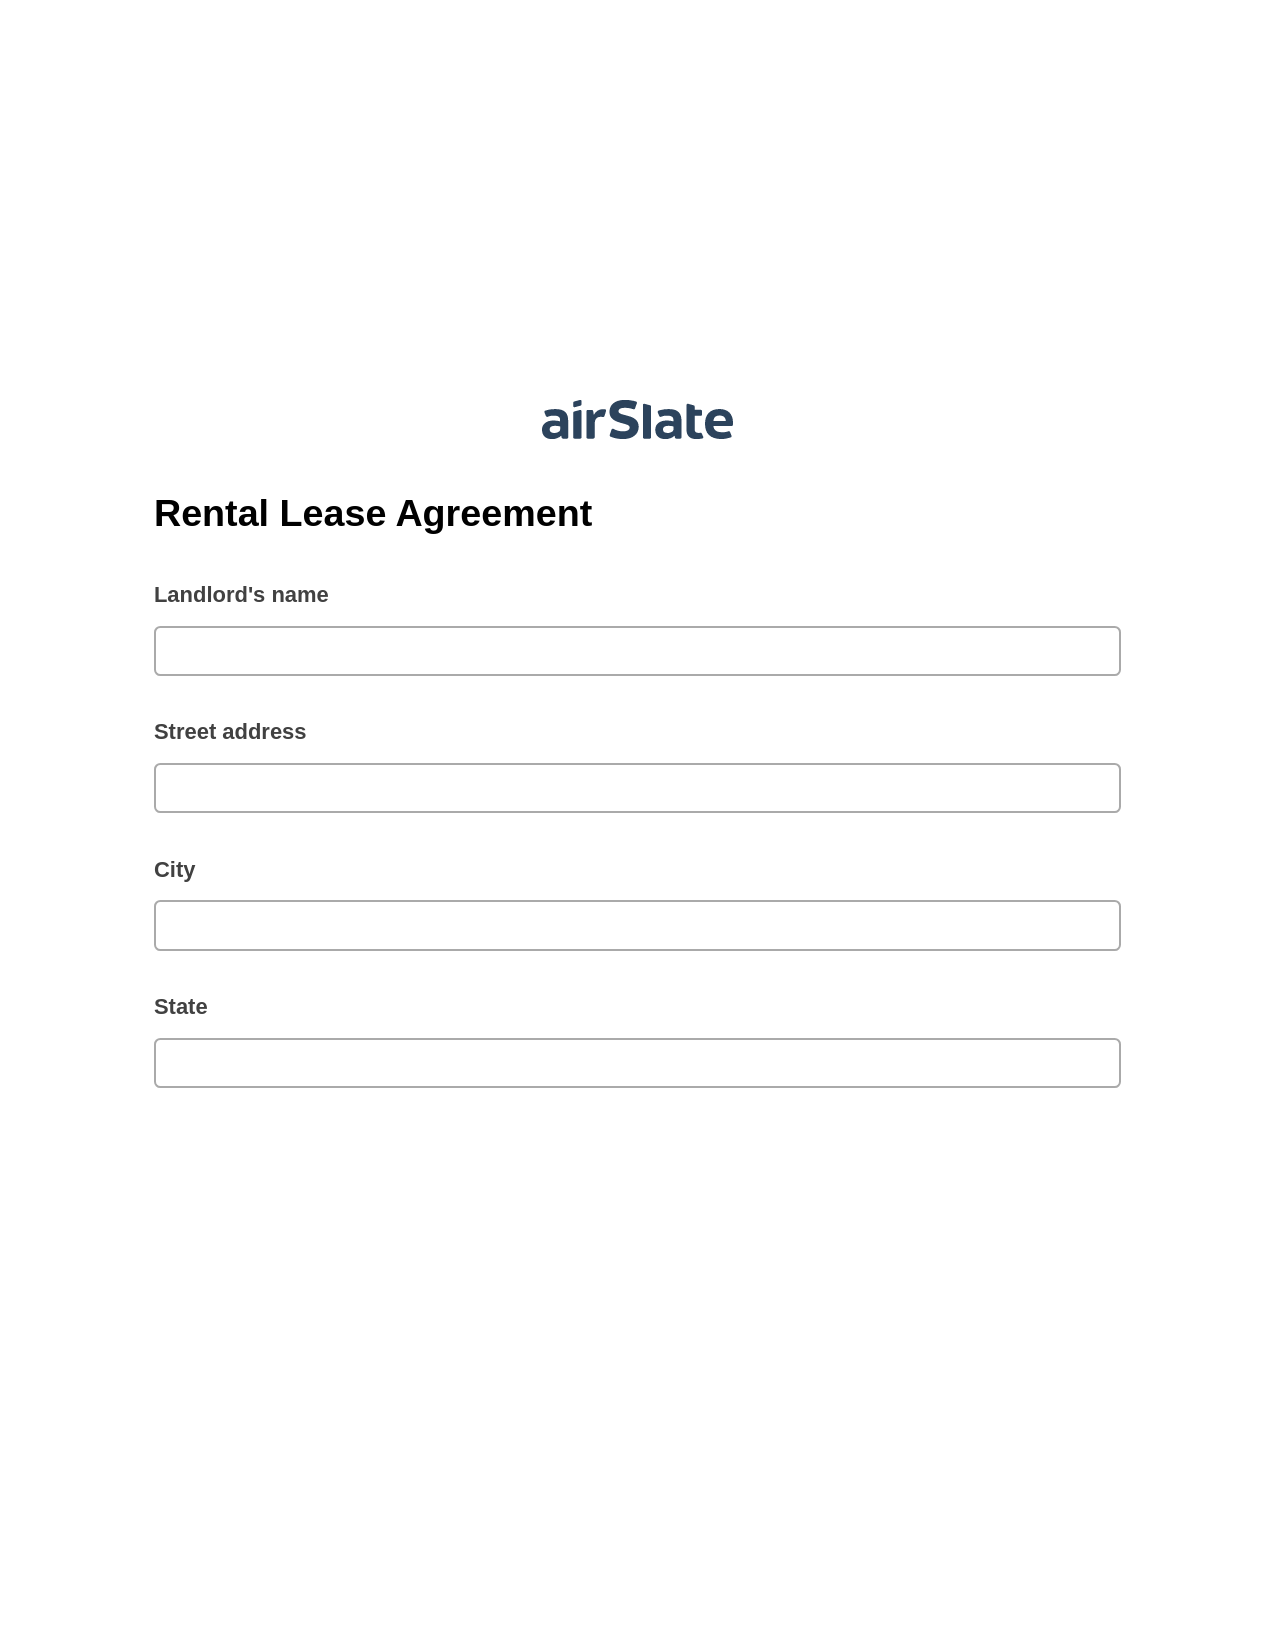 Rental Lease Agreement Pre-fill from Salesforce Record Bot, Update NetSuite Records Bot, OneDrive Bot